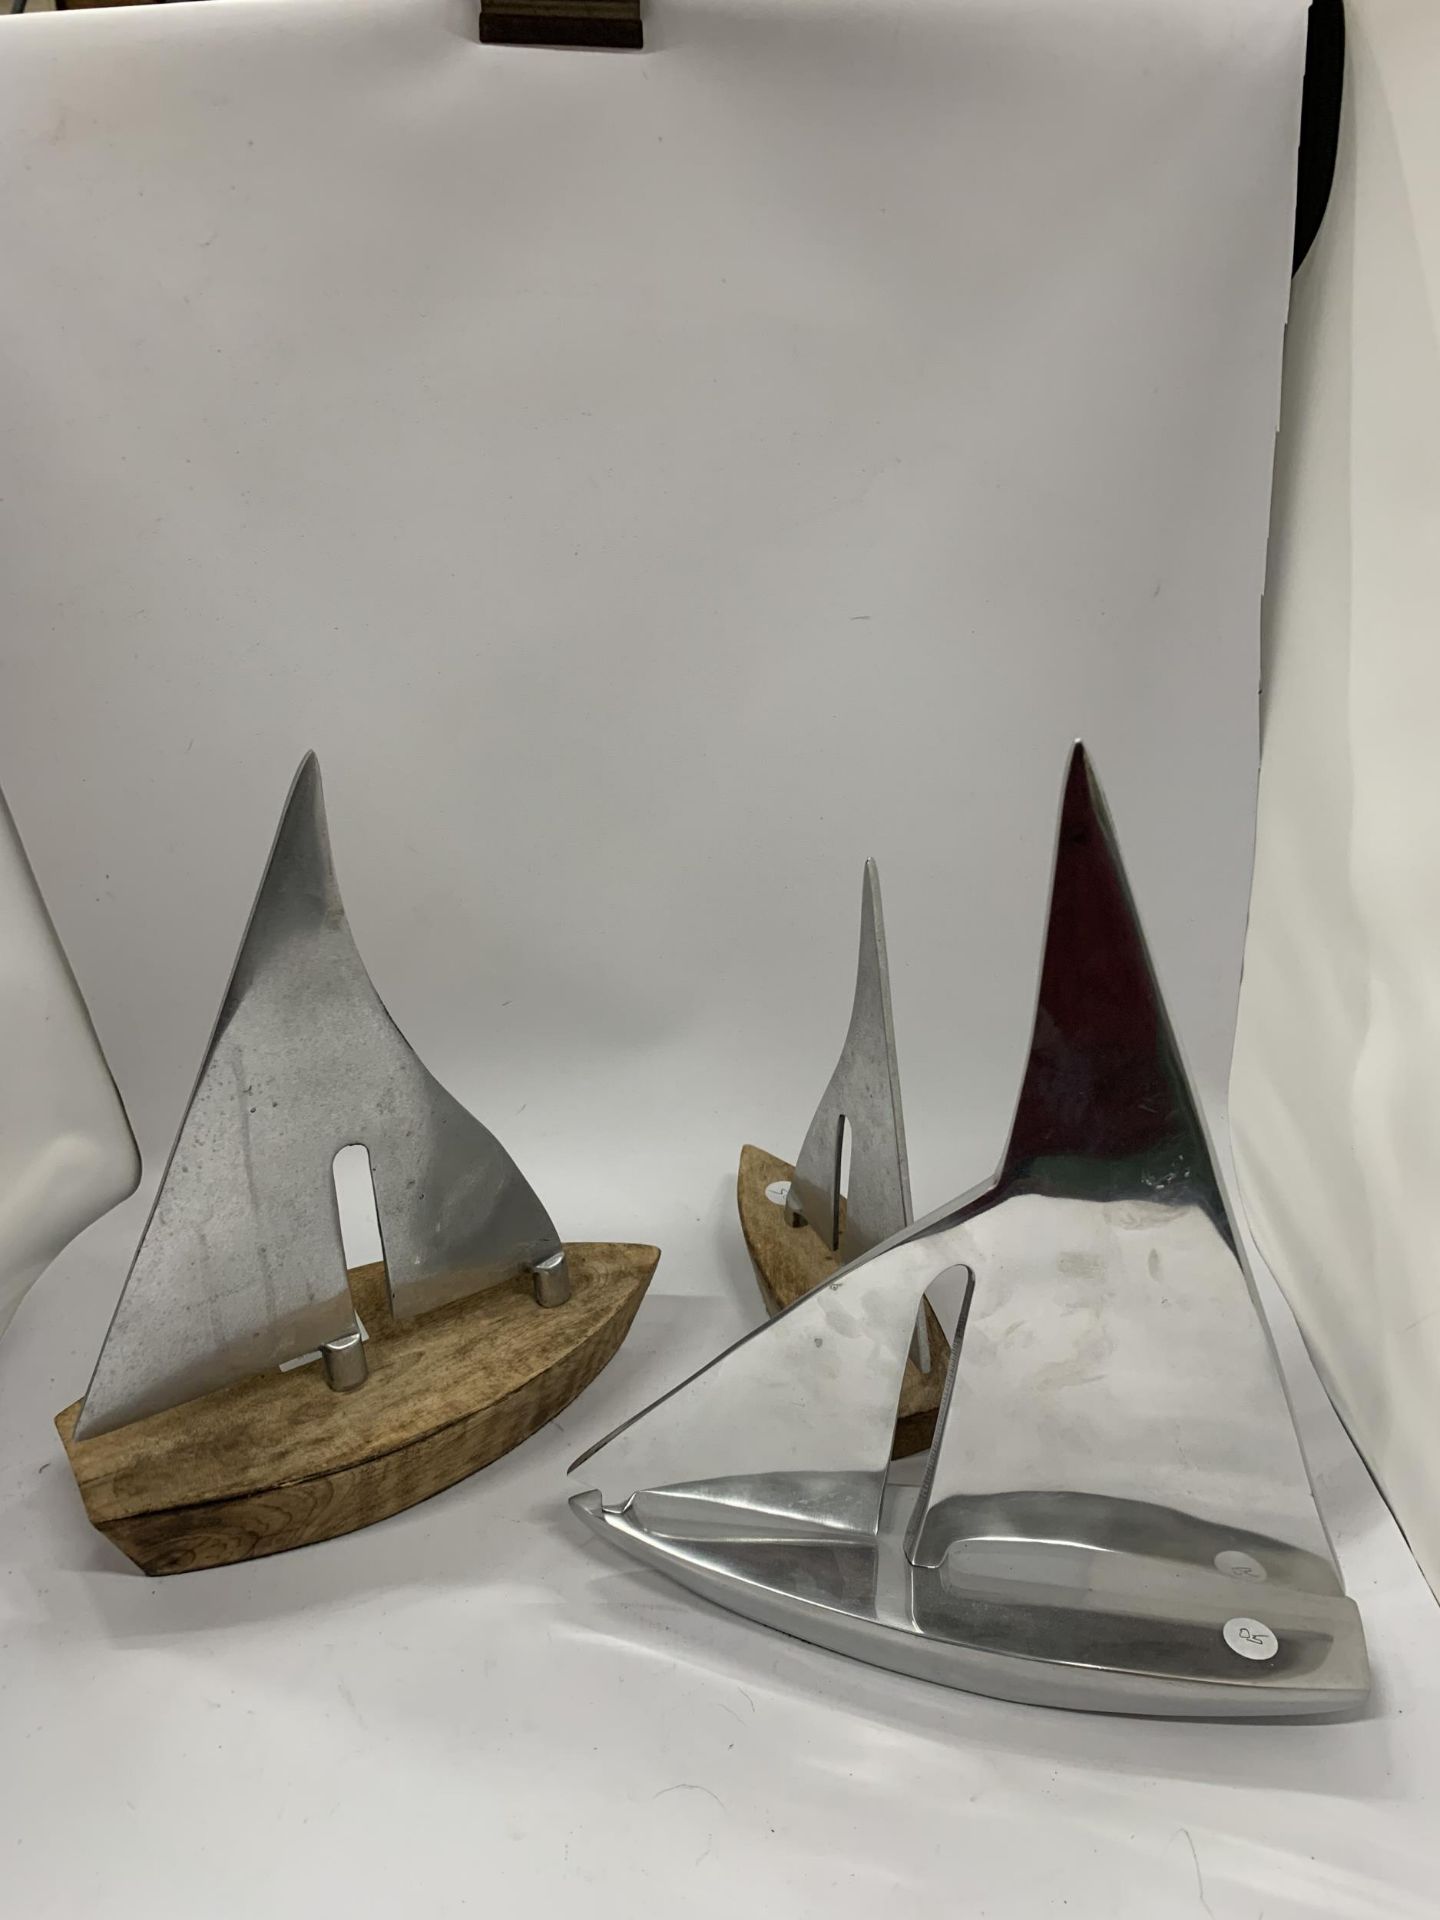 A COLLECTION OF THREE DANISH CHROME SHIP MODELS - Image 5 of 6